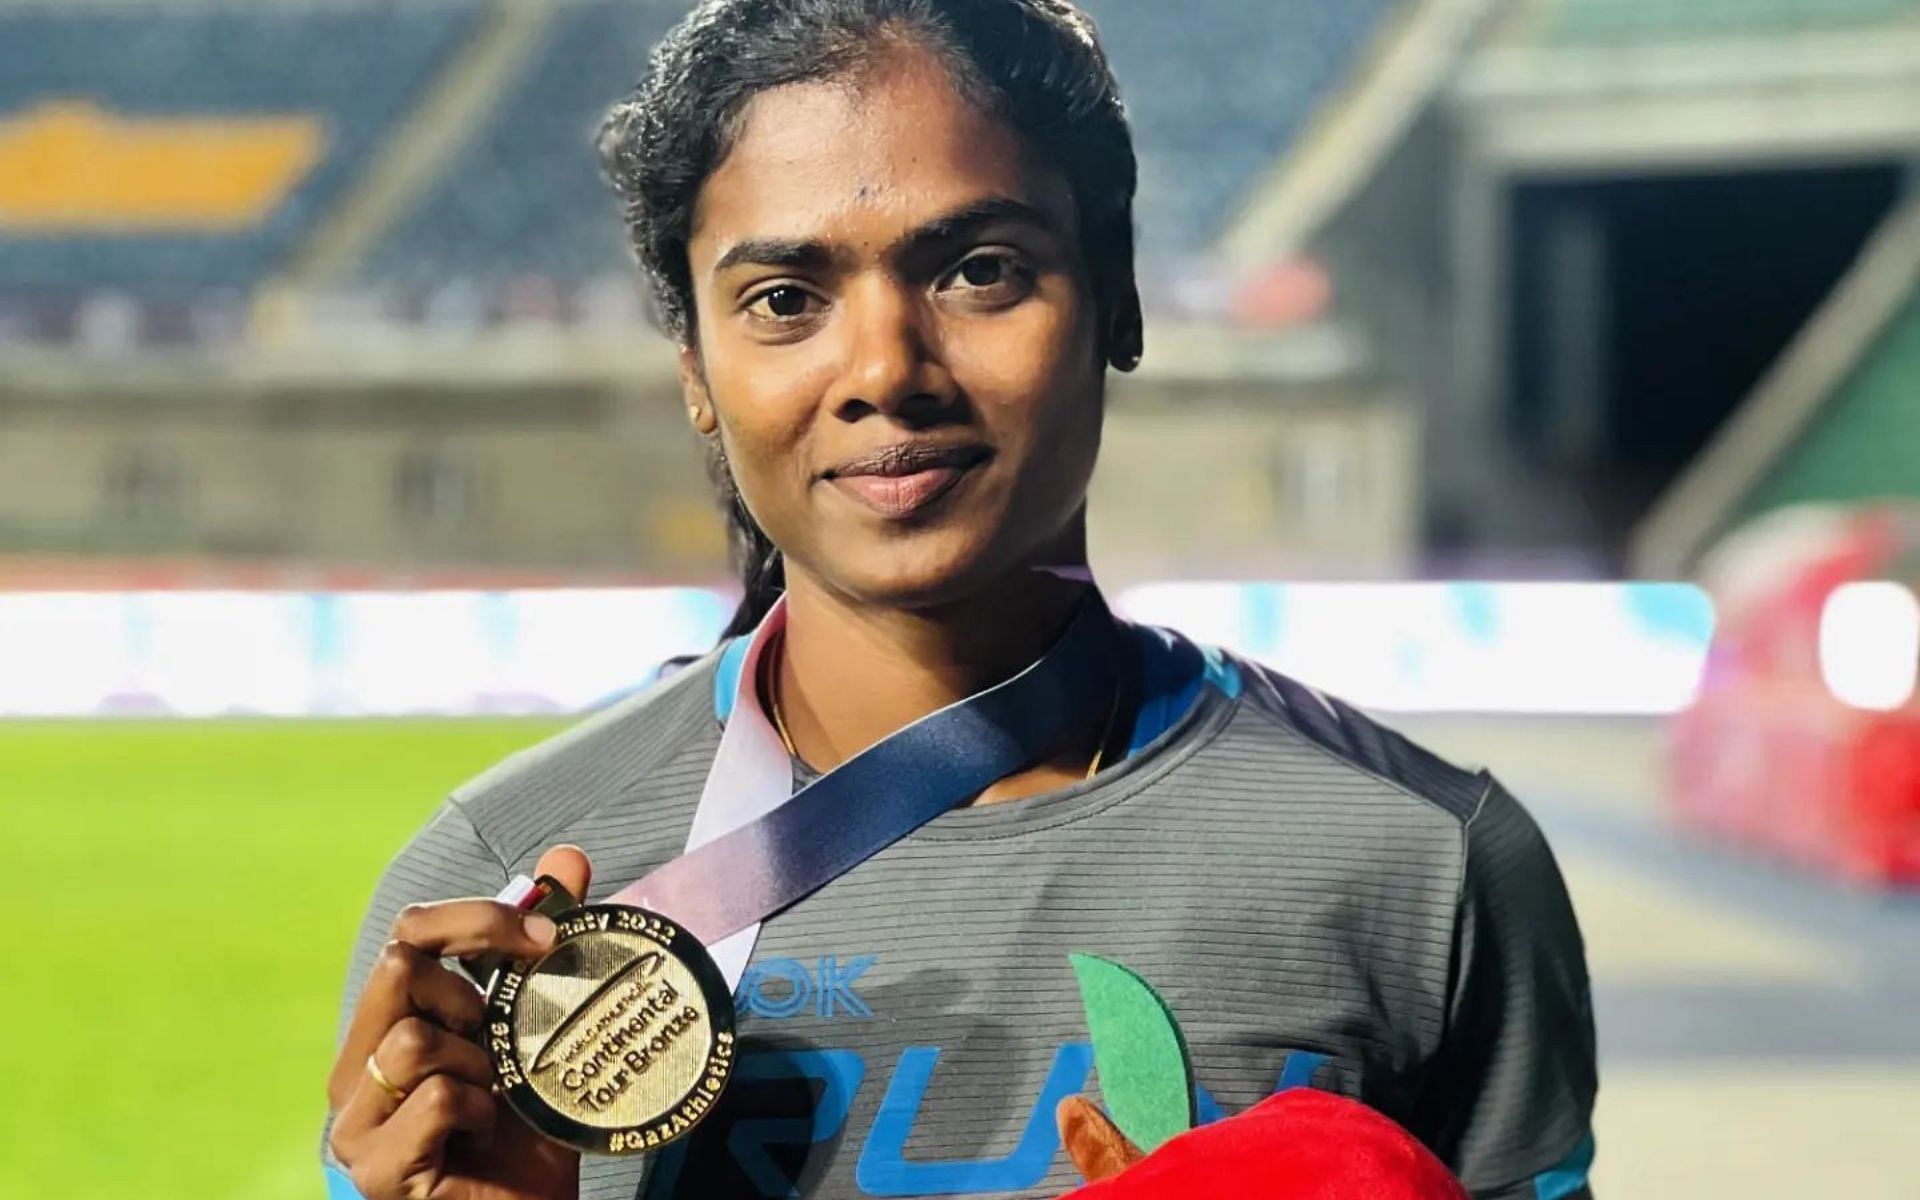 S Dhanalakshmi has been barred from participating in the CWG 2022 (Credits: Instagram)